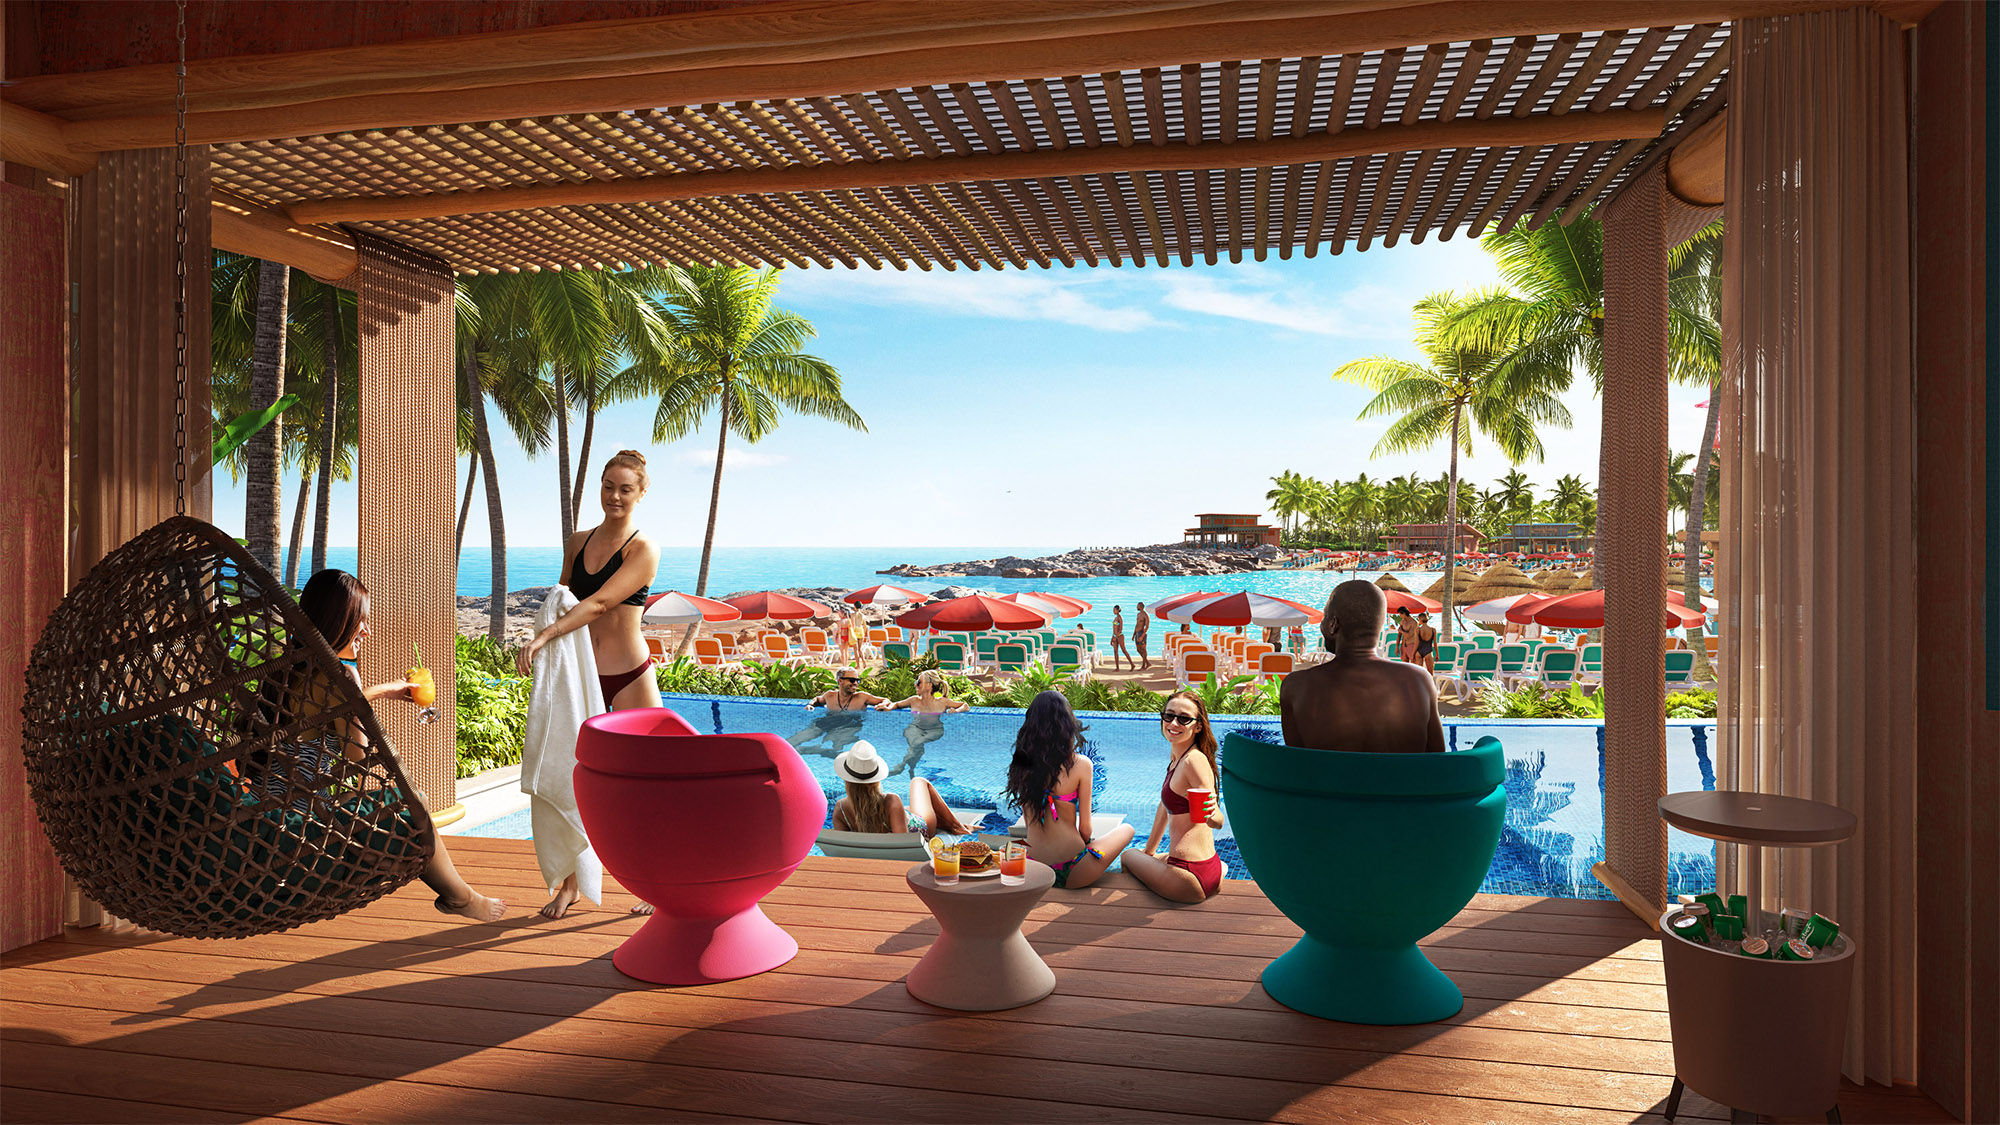 A rendering of one of the 20 cabanas at the upcoming Hideaway Beach adults-only area at Royal Caribbean's Perfect Day at CocoCay.